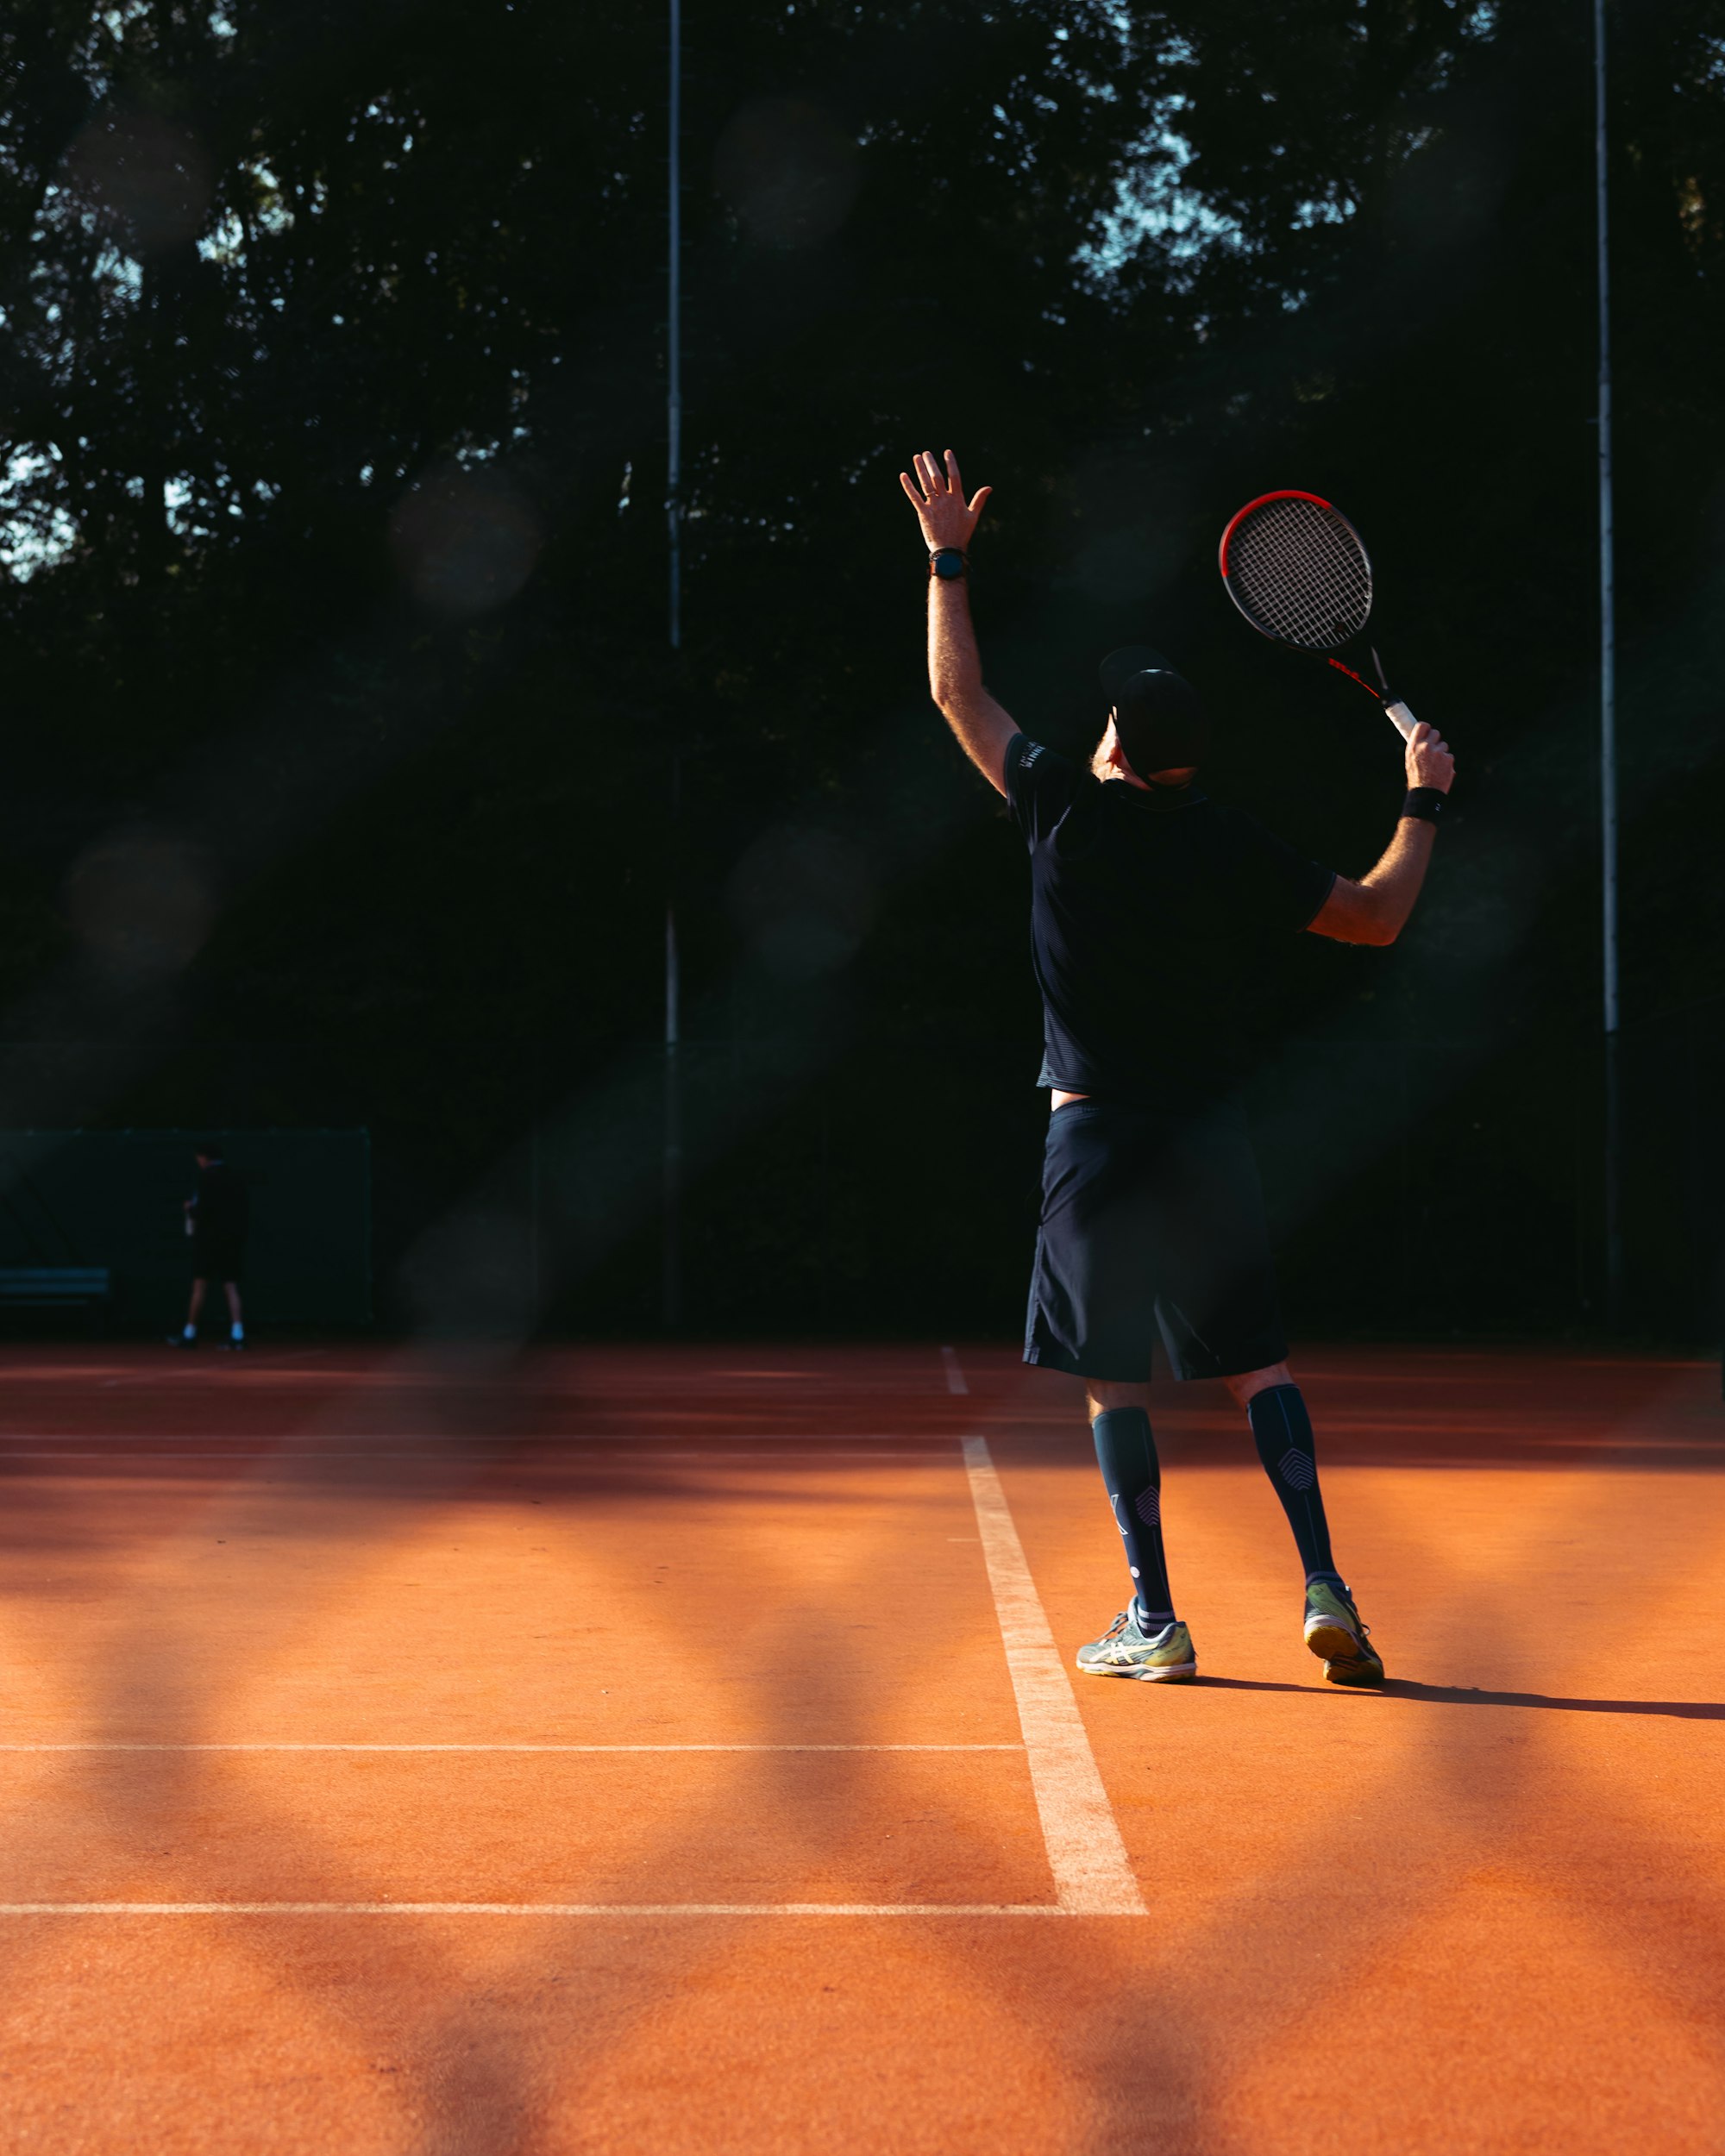 What Are The Four Types Of Serves In Tennis?